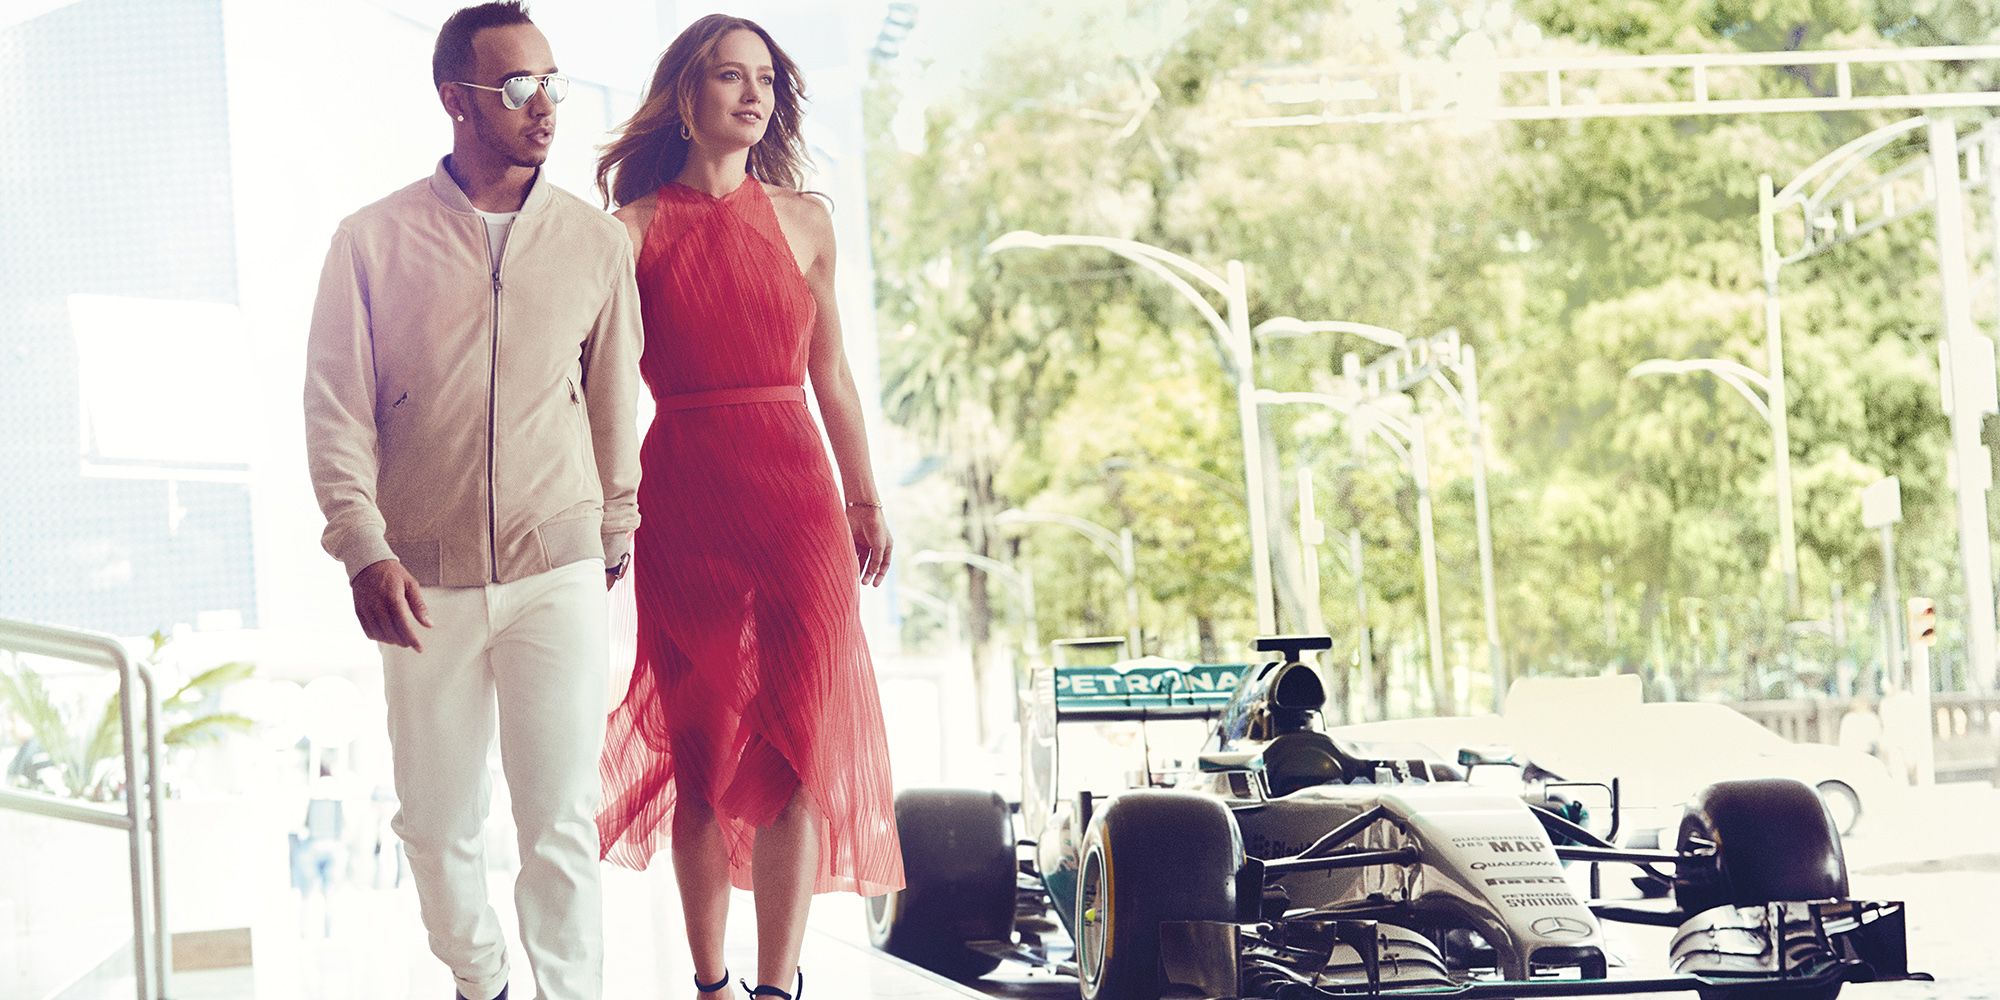 Lewis Hamilton looks dapper as he surrounds himself with gorgeous